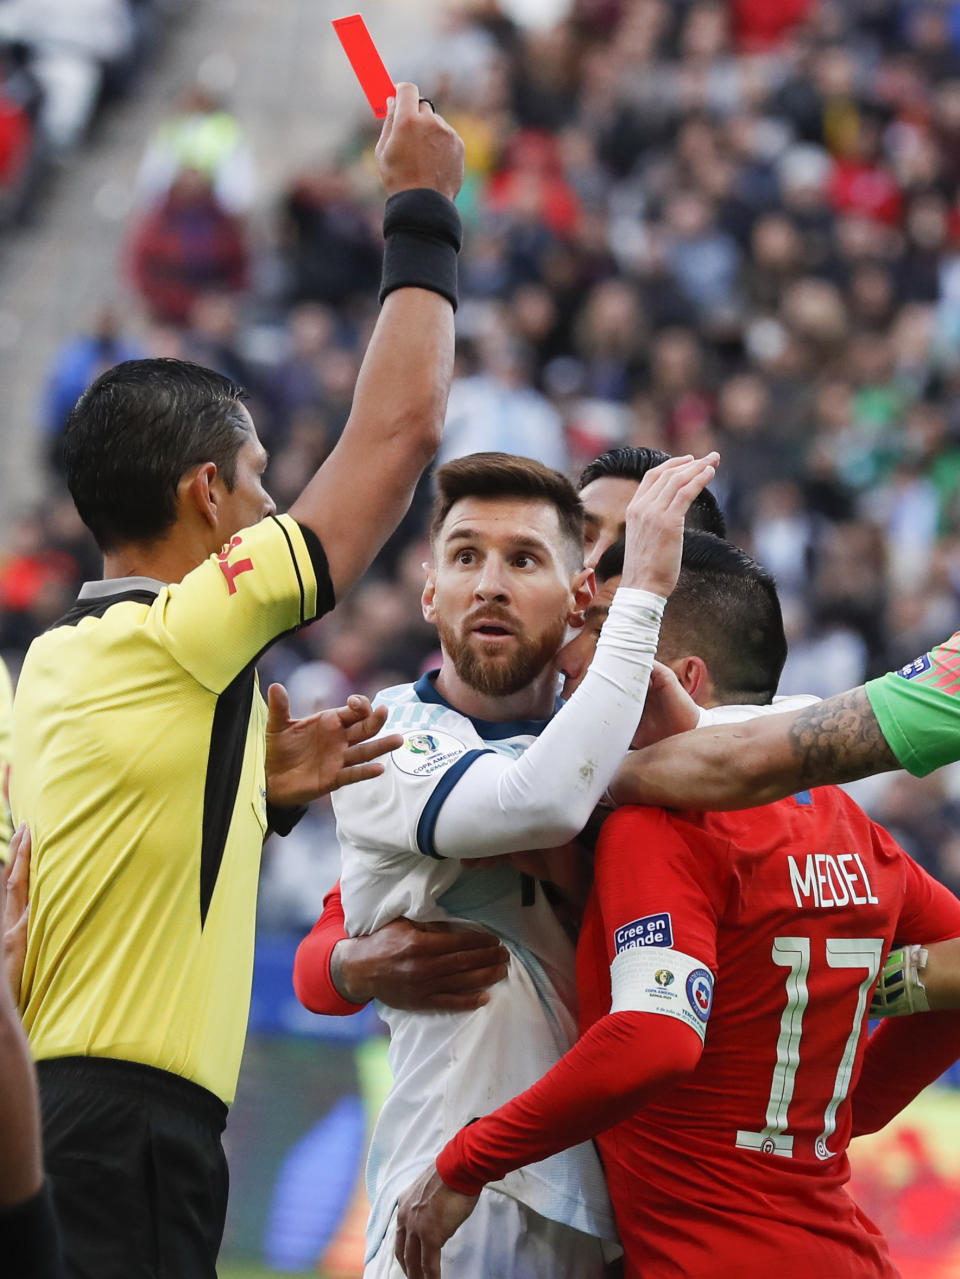 Argentina's Lionel Messi, center, and Chile's Gary Medel, right, scuffle as referee Mario Diaz, from Paraguay, left, shows the red card to both of them during Copa America third-place soccer match at the Arena Corinthians in Sao Paulo, Brazil, Saturday, July 6, 2019. (AP Photo/Victor R. Caivano)